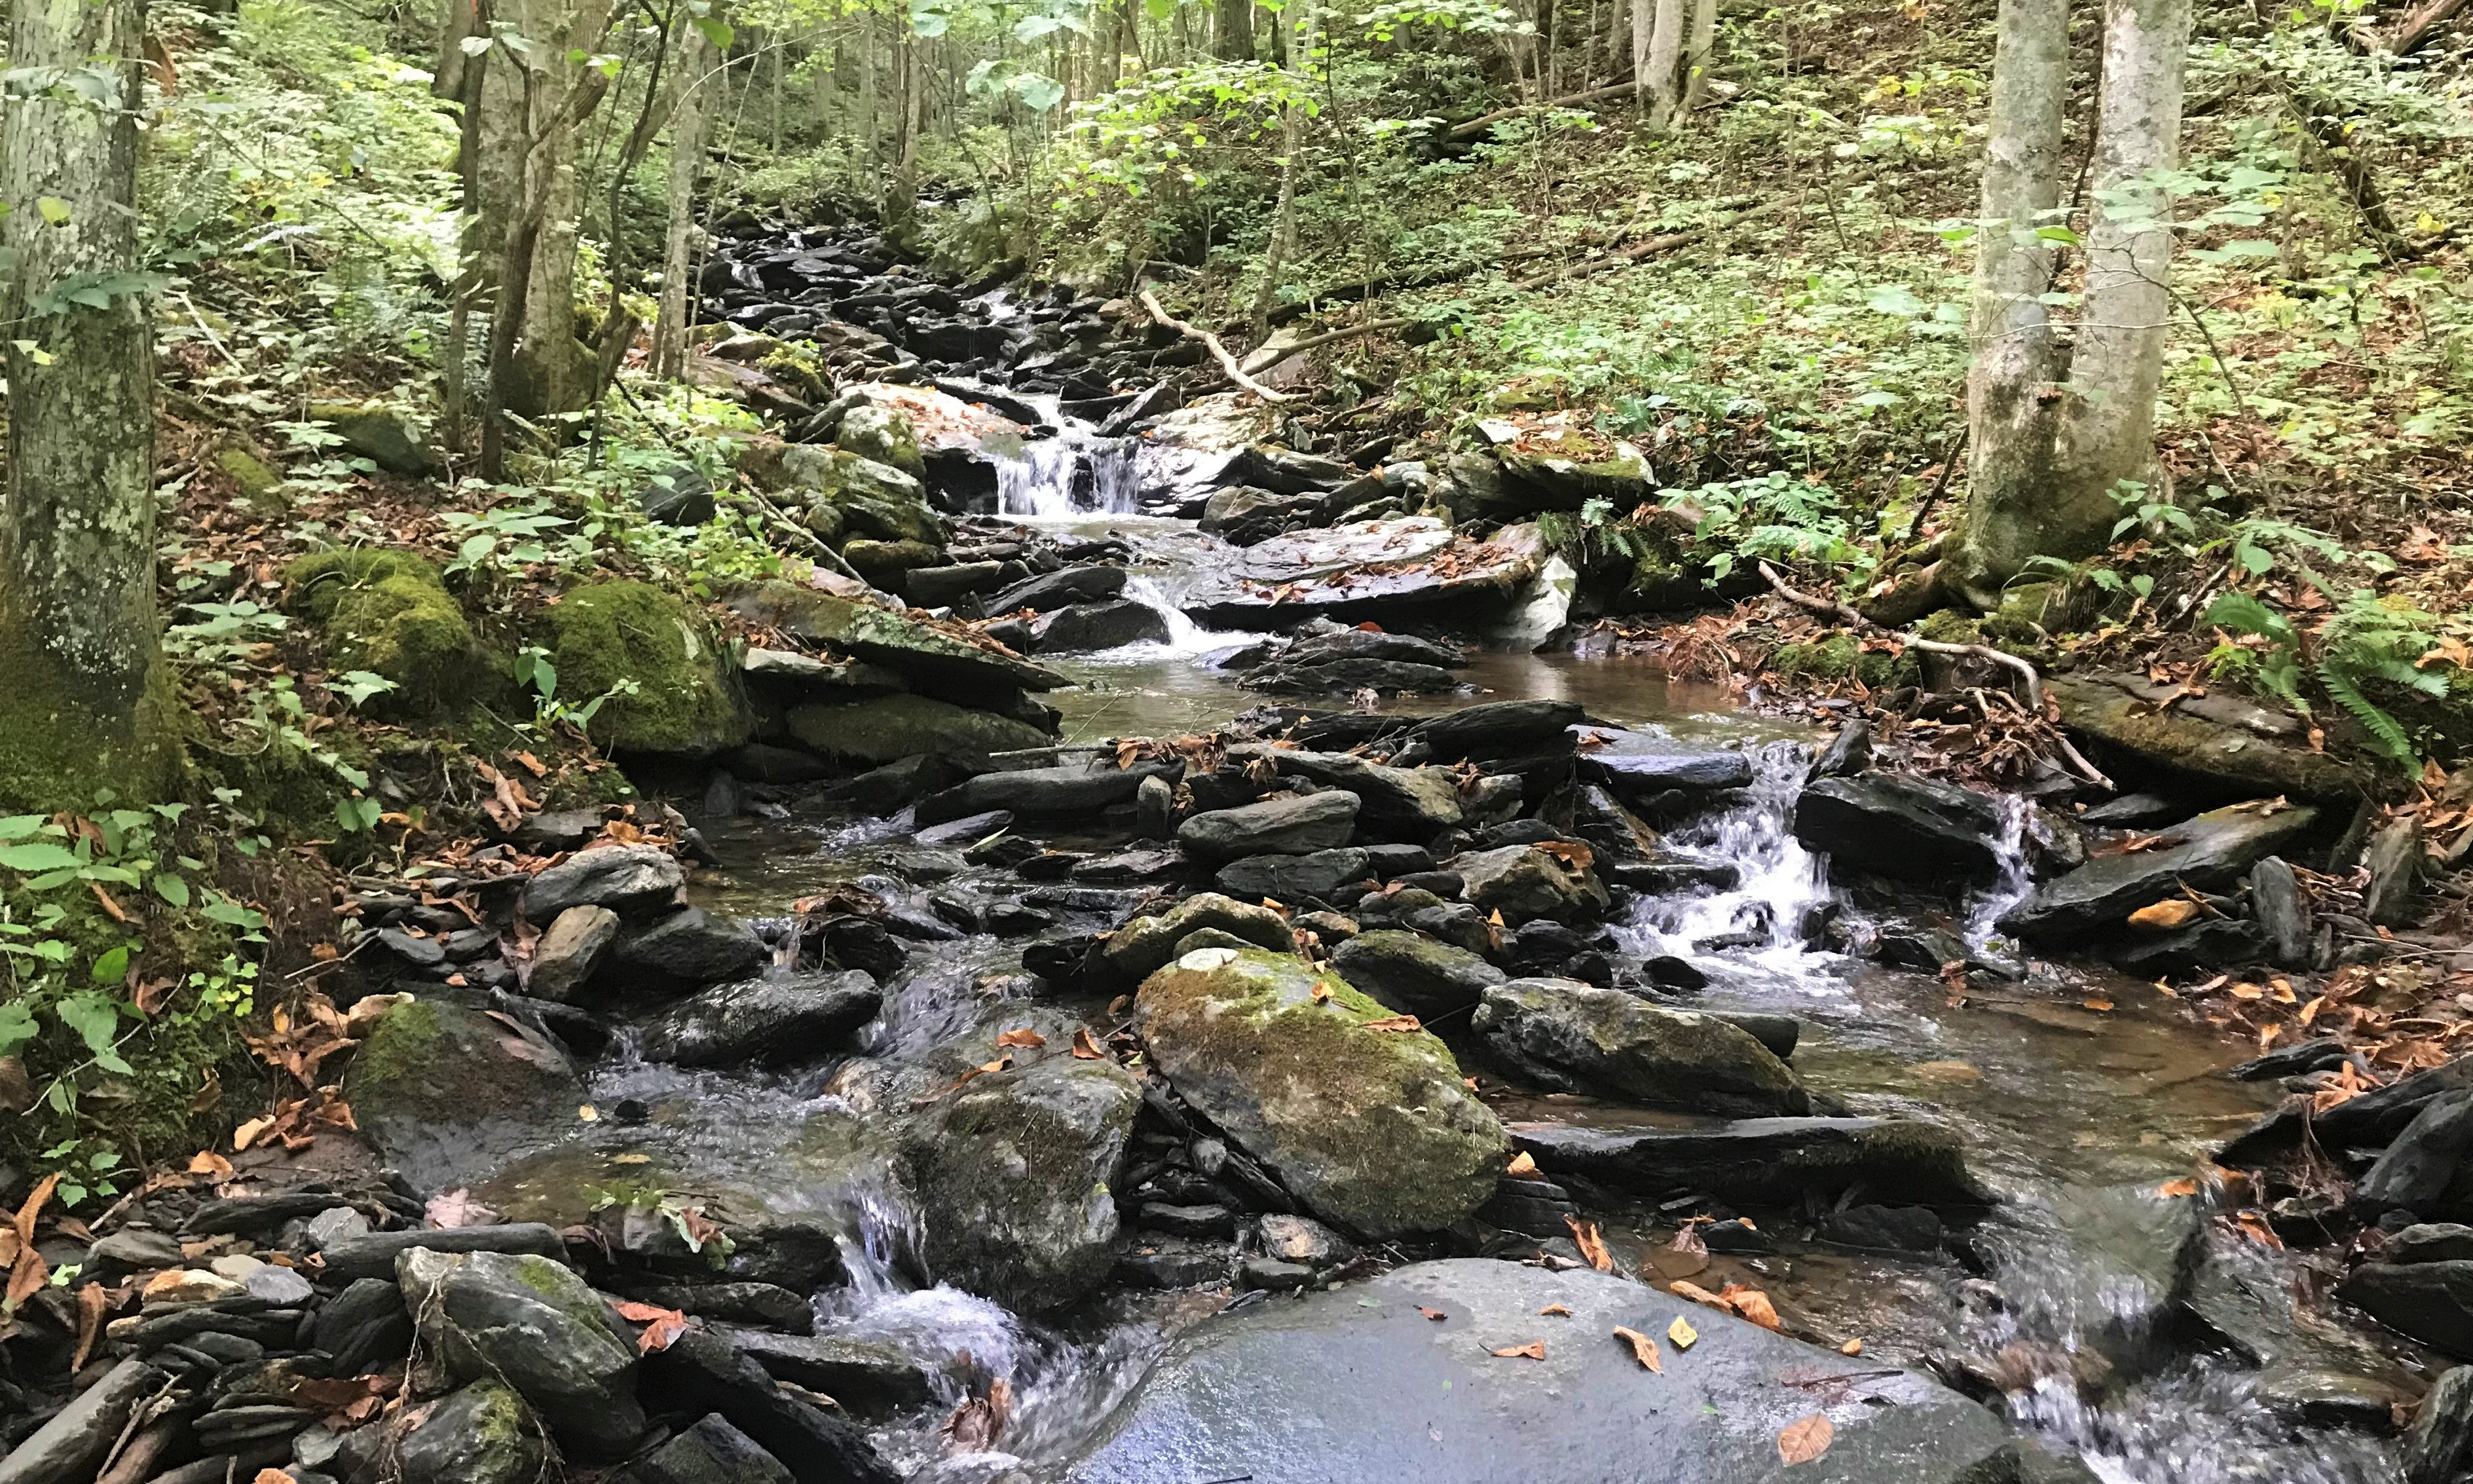 This private unrestricted 29.44 acre tract of land boasts a noisy mountain creek that tumbles for over 1,500 feet along the northern edge of this pristine wooded acreage tract located off of Edwin Blevins Road in the Jefferson area of Ashe County in the North Carolina Mountains.